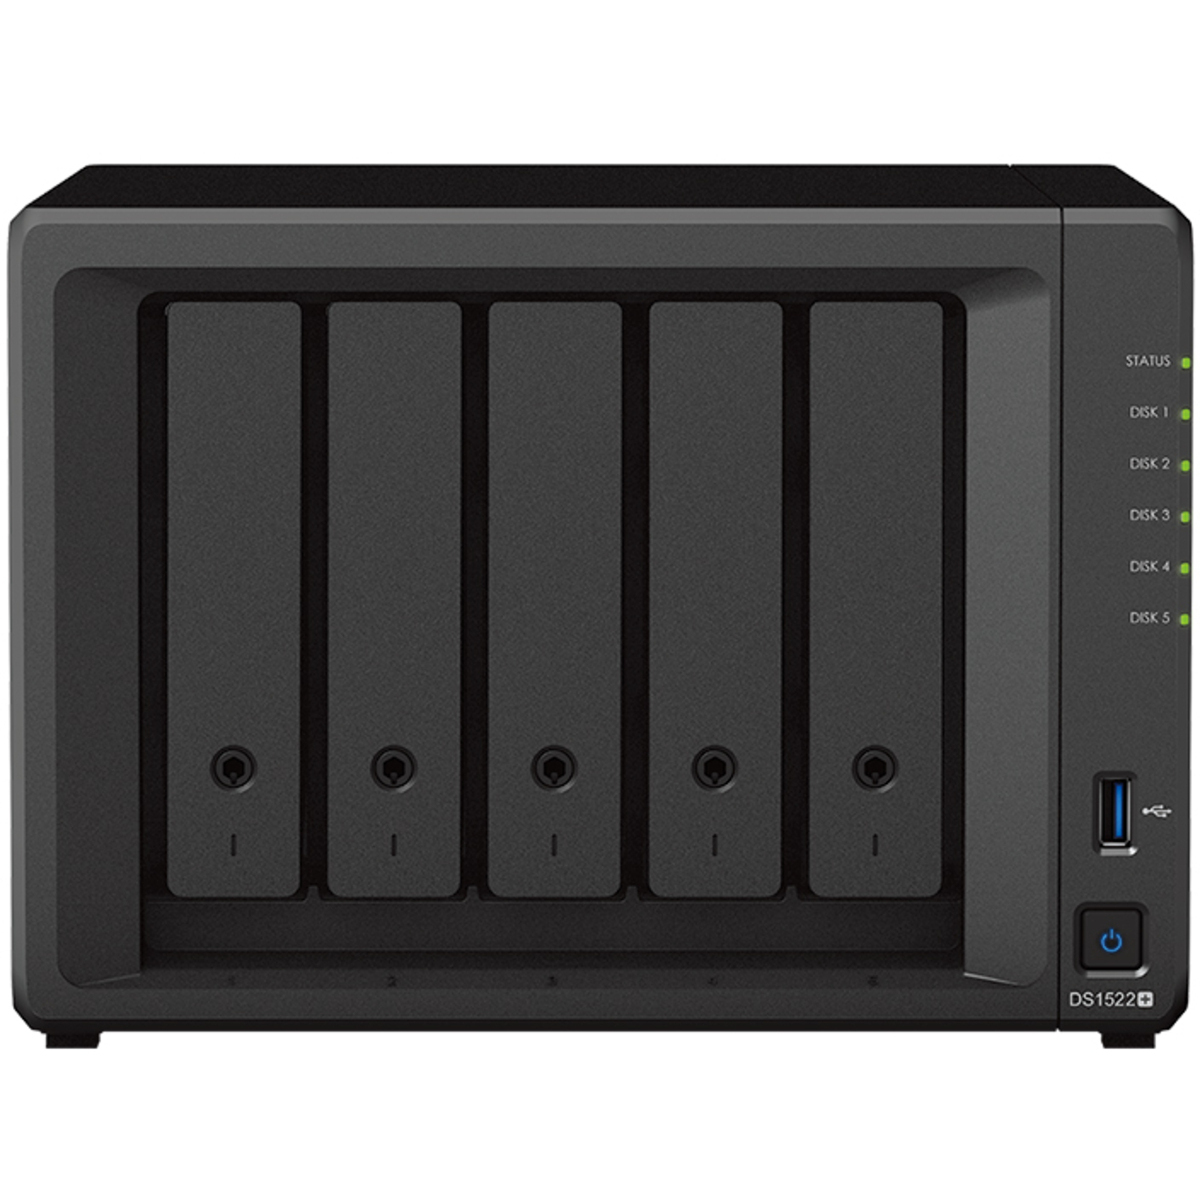 Synology DiskStation DS1522+ 50tb 5-Bay Desktop Multimedia / Power User / Business NAS - Network Attached Storage Device 5x10tb Seagate IronWolf Pro ST10000NT001 3.5 7200rpm SATA 6Gb/s HDD NAS Class Drives Installed - Burn-In Tested - ON SALE DiskStation DS1522+